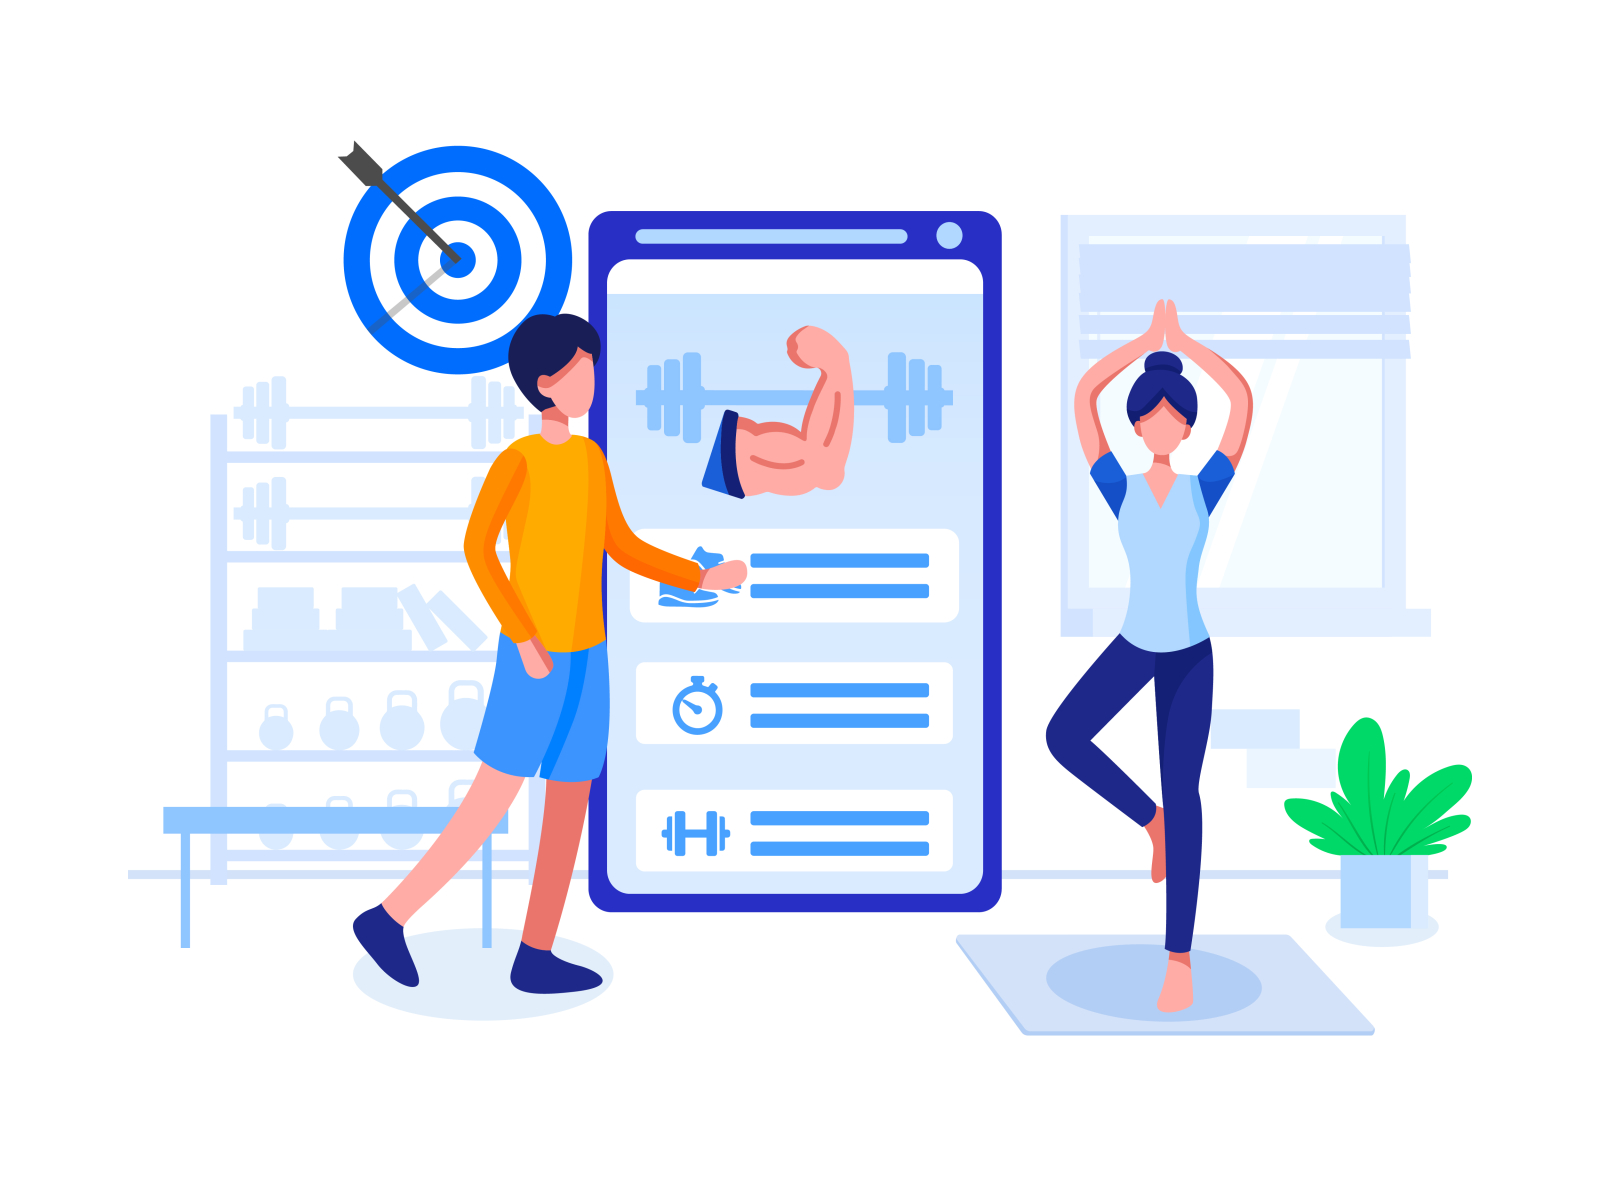 Fitness Training App Flat Illustration Concept By Hoangpts On Dribbble